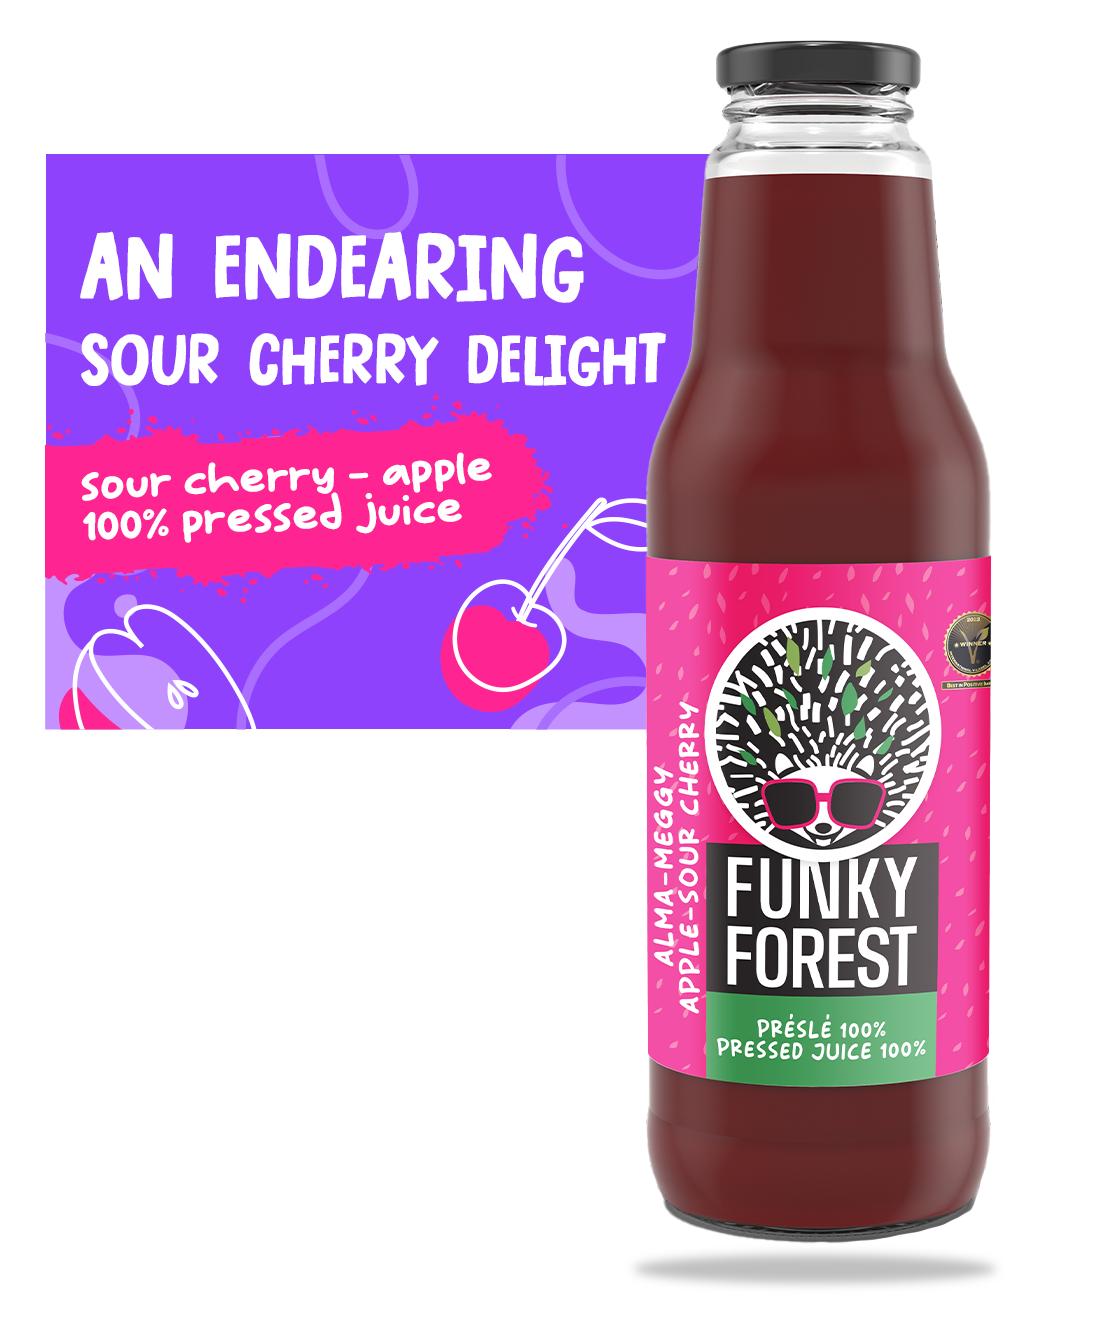 Funky Forest 100% sour cherry-apple